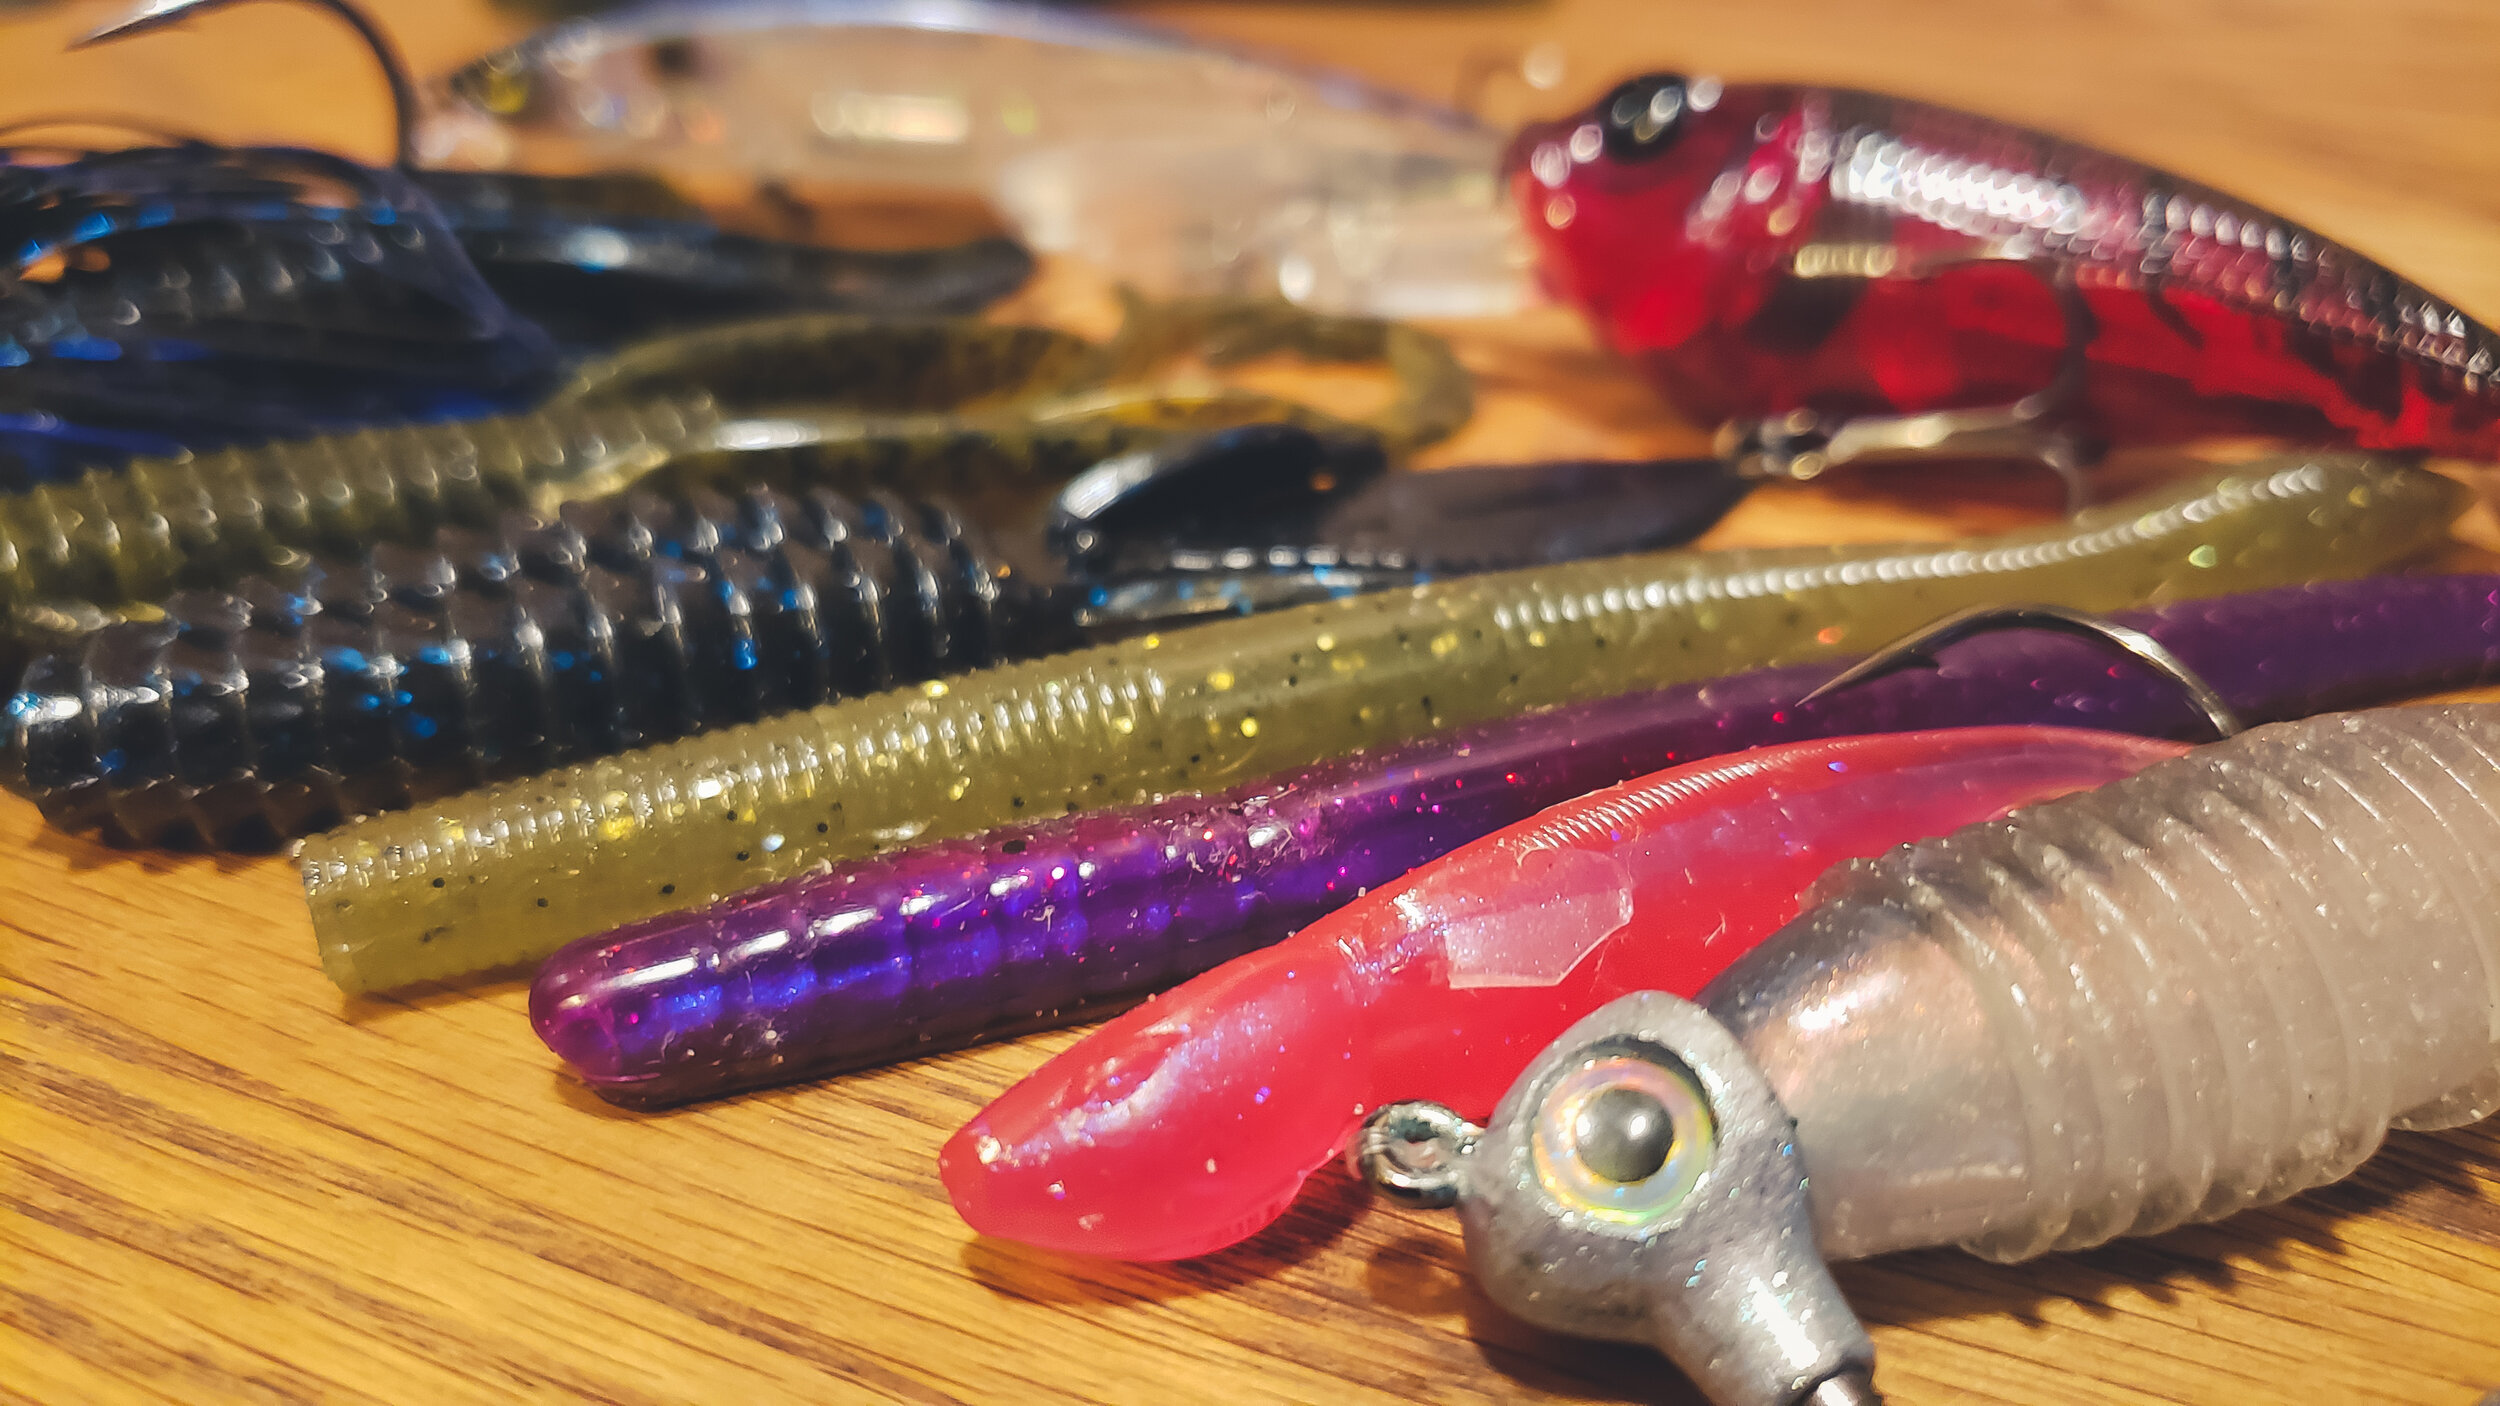 Bass do bite plastic worms, and purple might just be their favorite